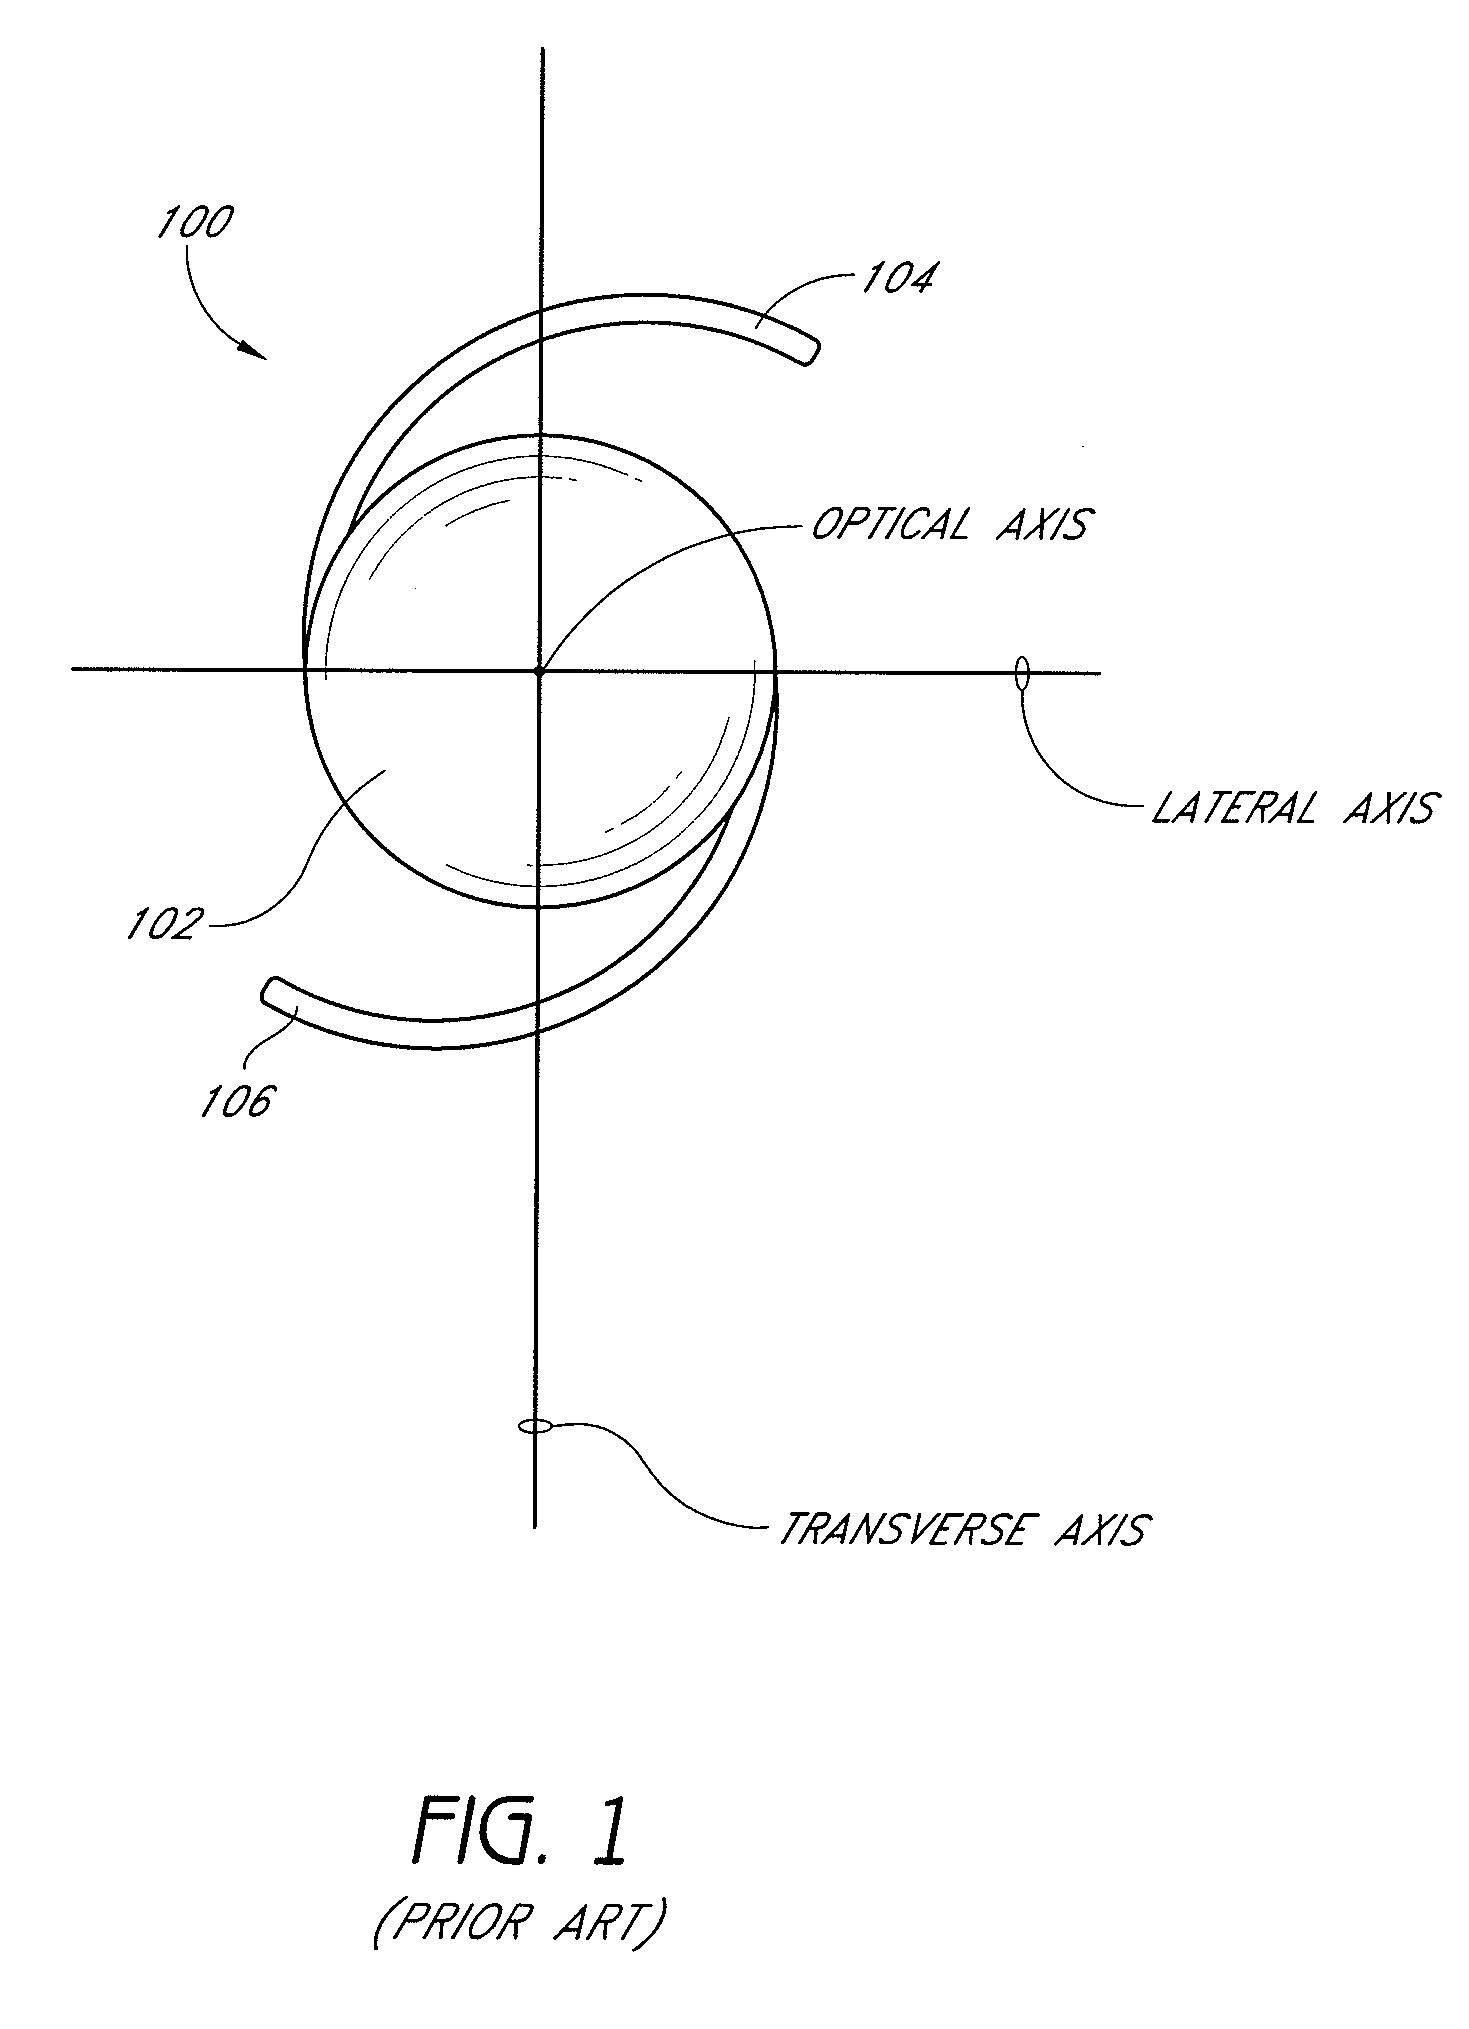 Method and Device for Inserting an Intraocular Lens